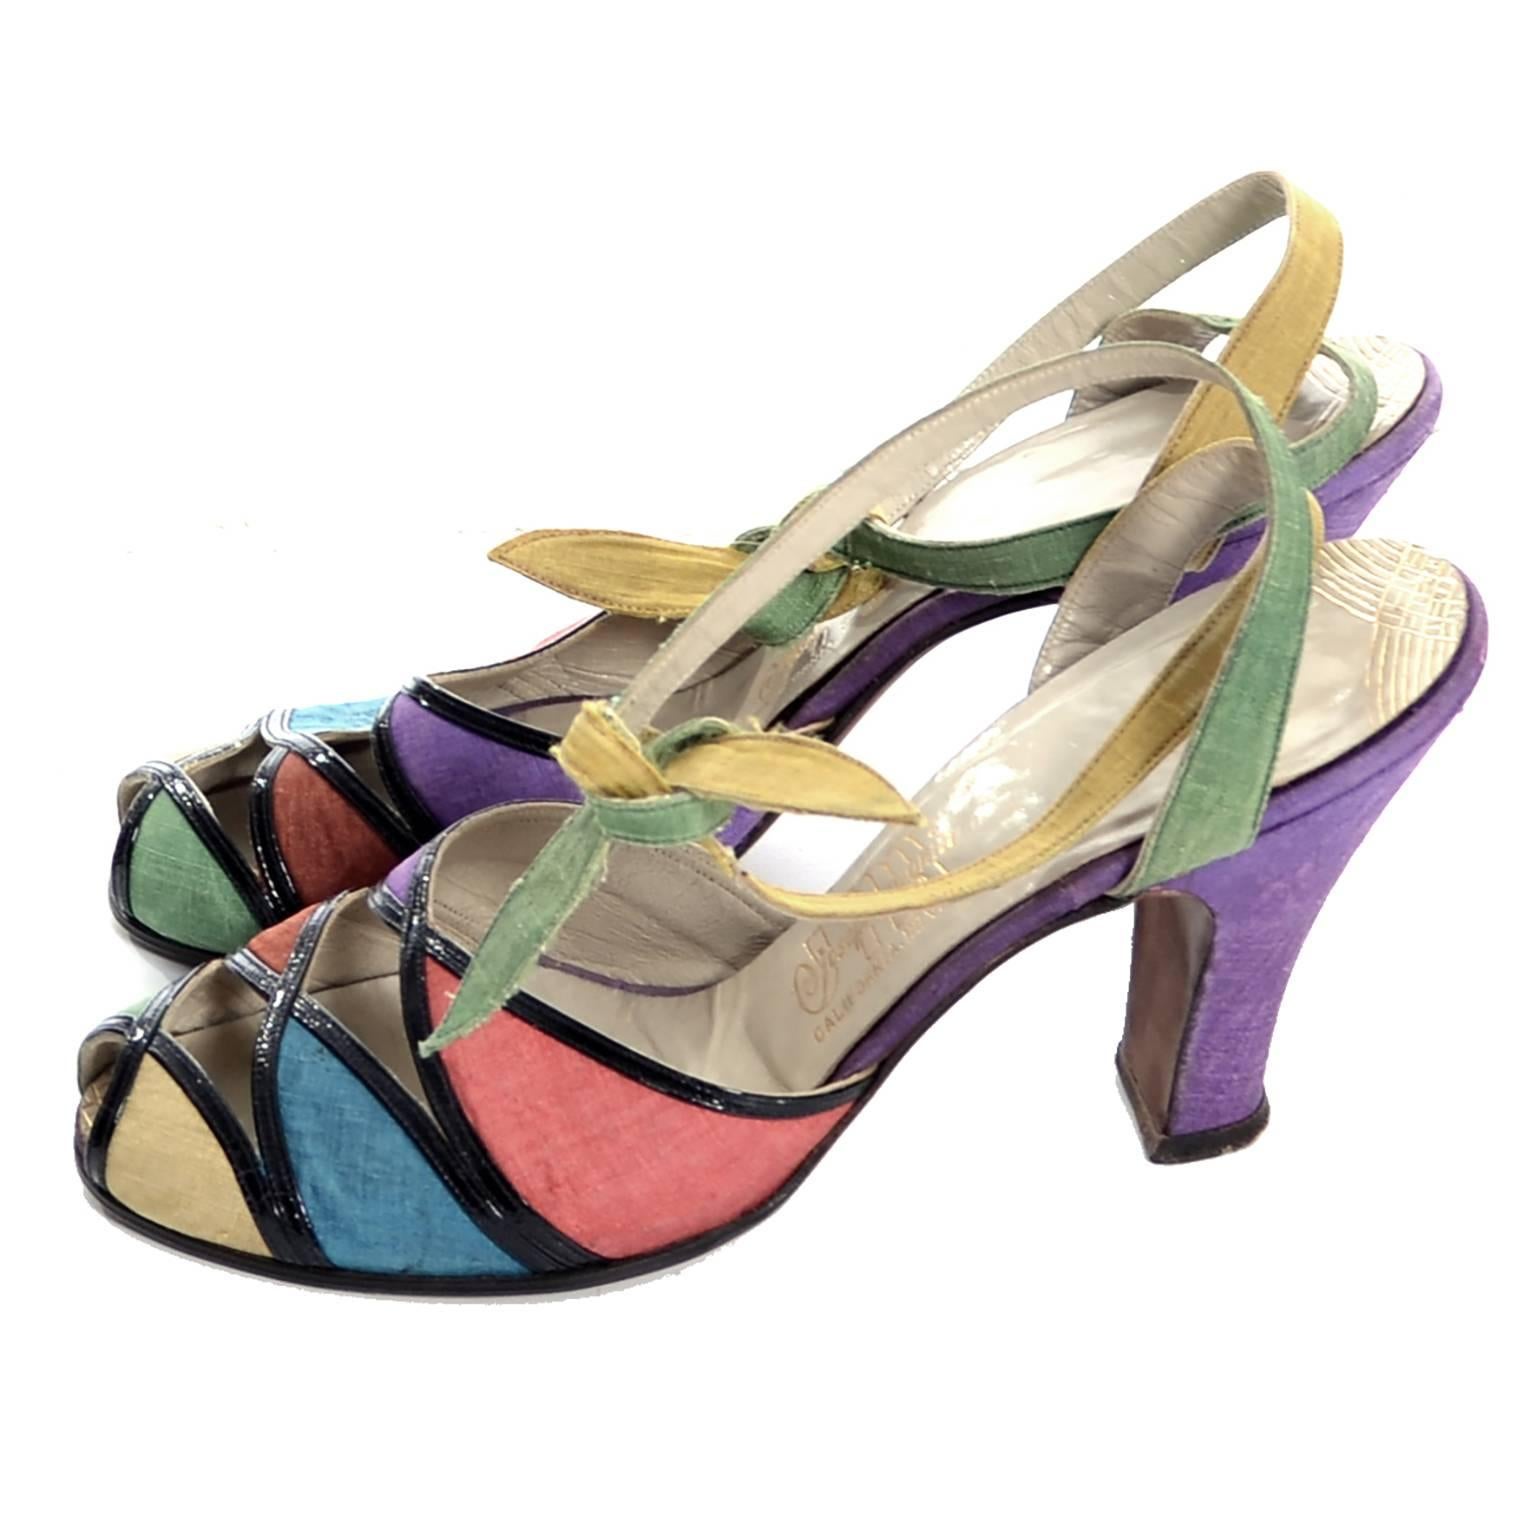 These are absolutely exceptional vintage 1940's multi colored silk and black leather peep toe shoes with ankle straps that tie.  These are some of my personal favorite vintage shoes and they come from an estate that was my favorite estate of vintage